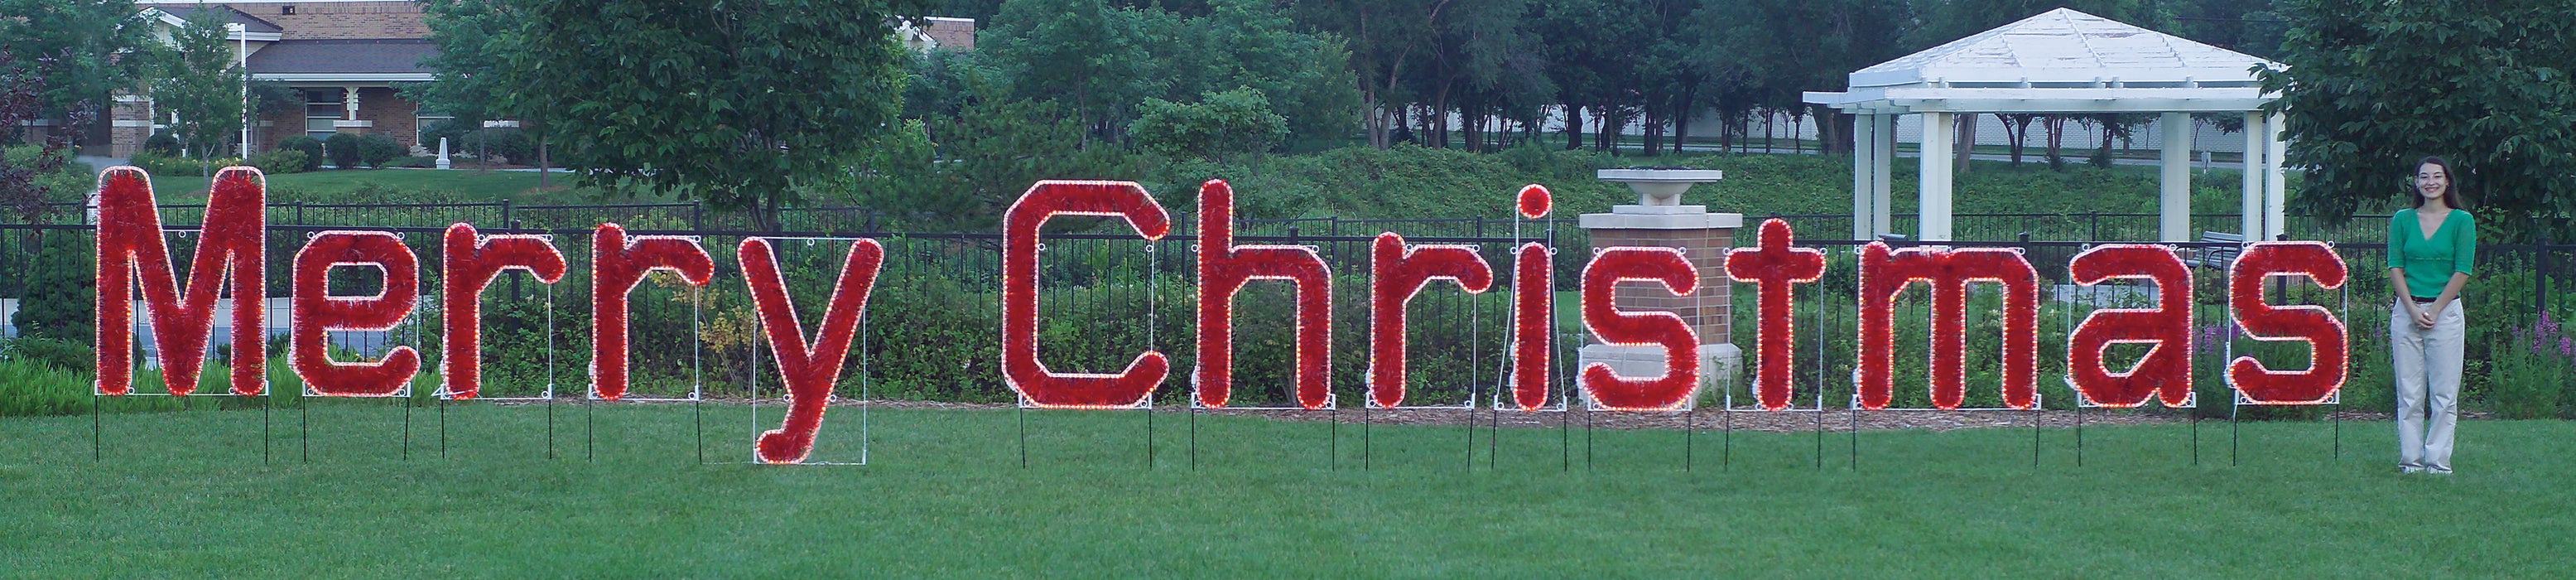 Large Merry Christmas in Red LED Lights and Garland, lighted outdoor motif, Holiday, traditional yard motifs